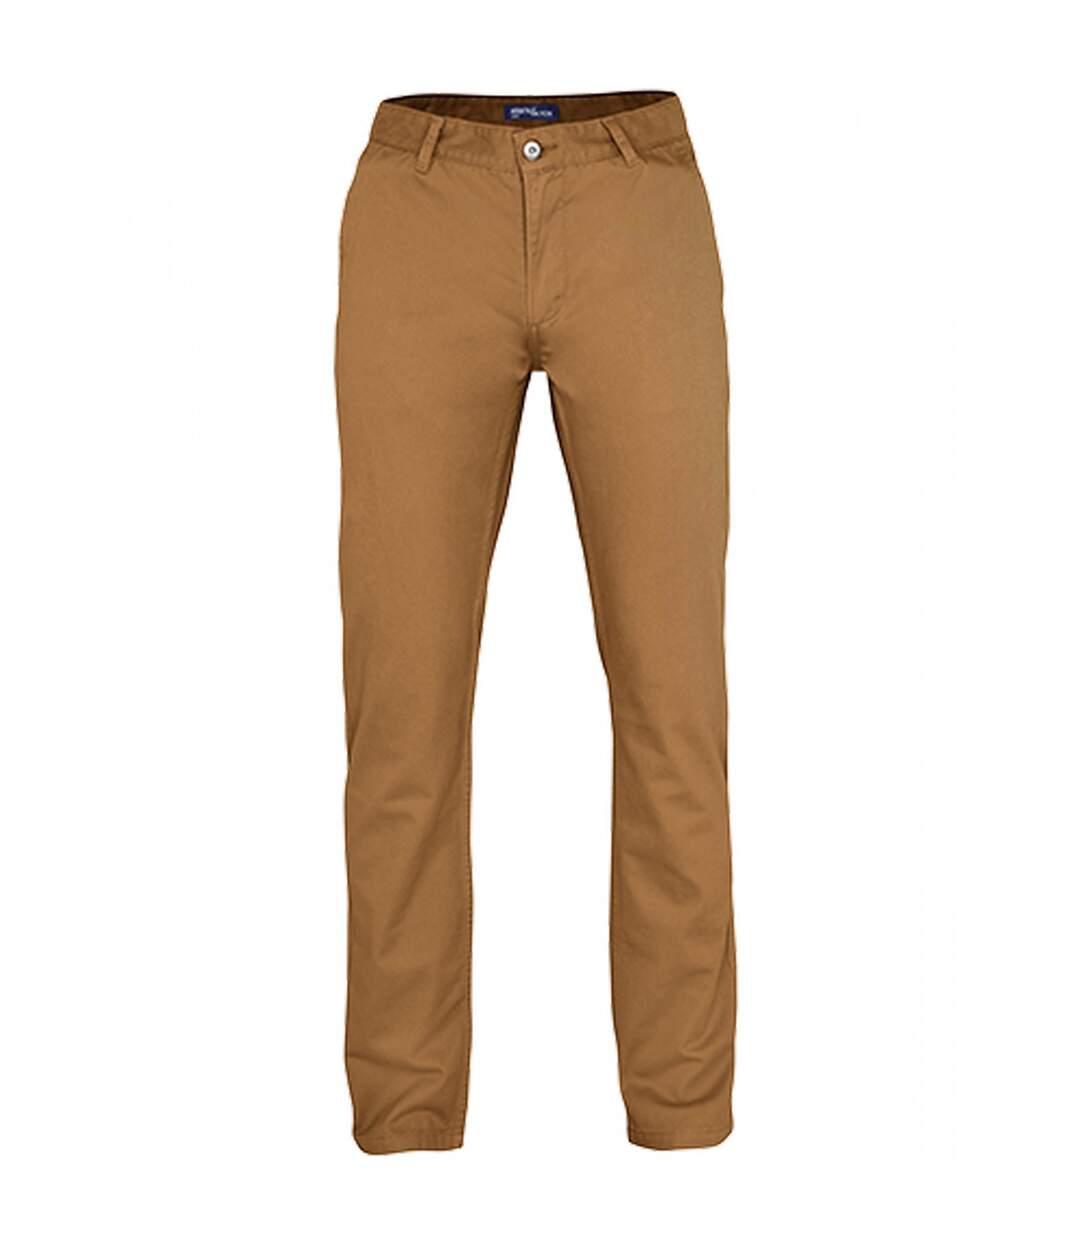 Asquith & Fox Mens Classic Casual Chinos/Trousers (Camel) - UTRW3473